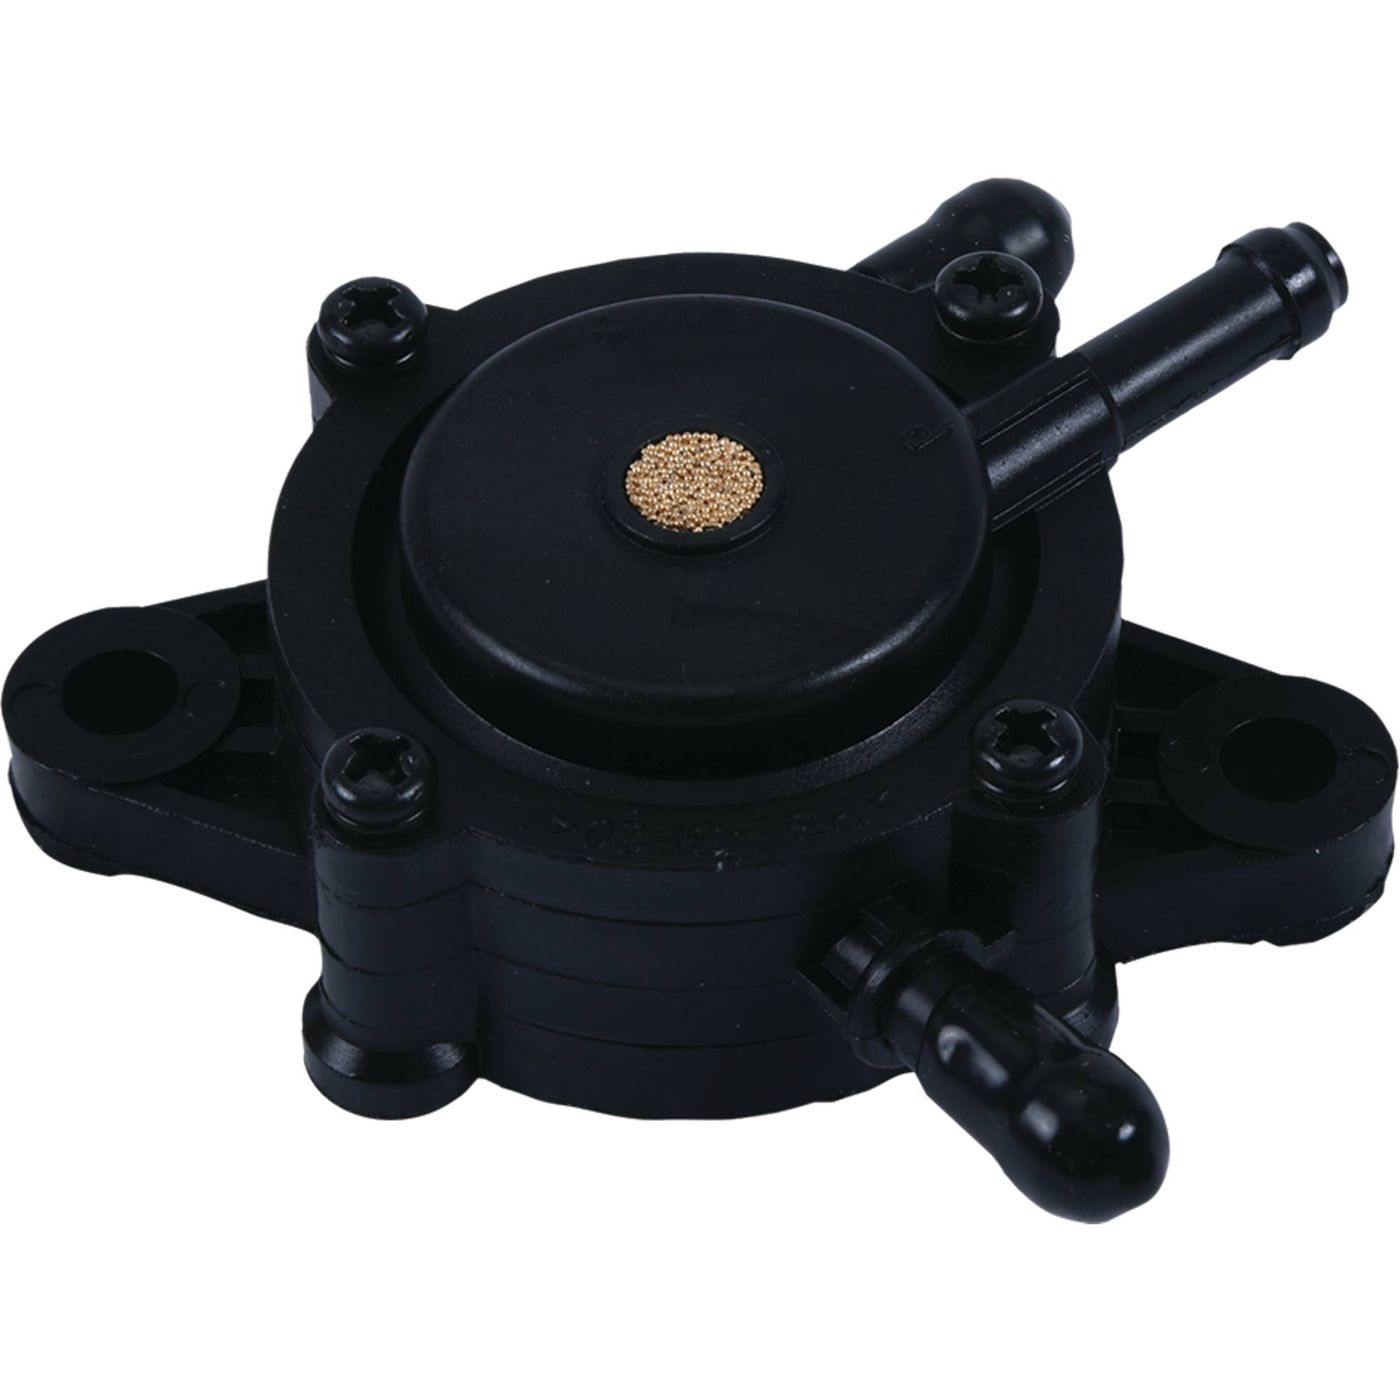 Wrp Fuel Pumps - WRP475008 image